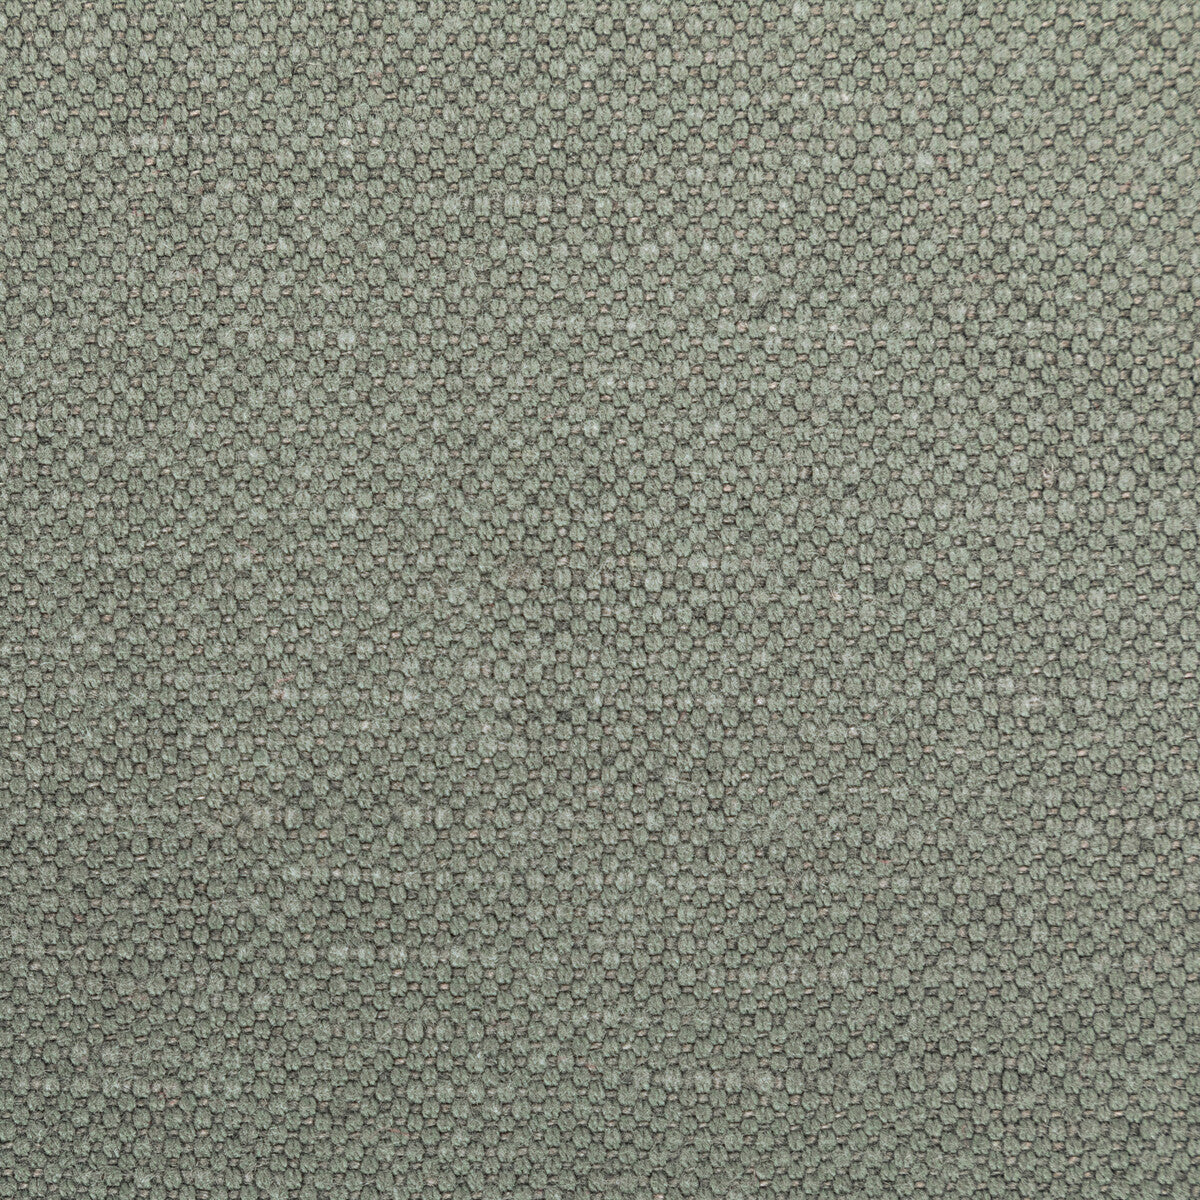 Carson fabric in ashes color - pattern 36282.52.0 - by Kravet Basics